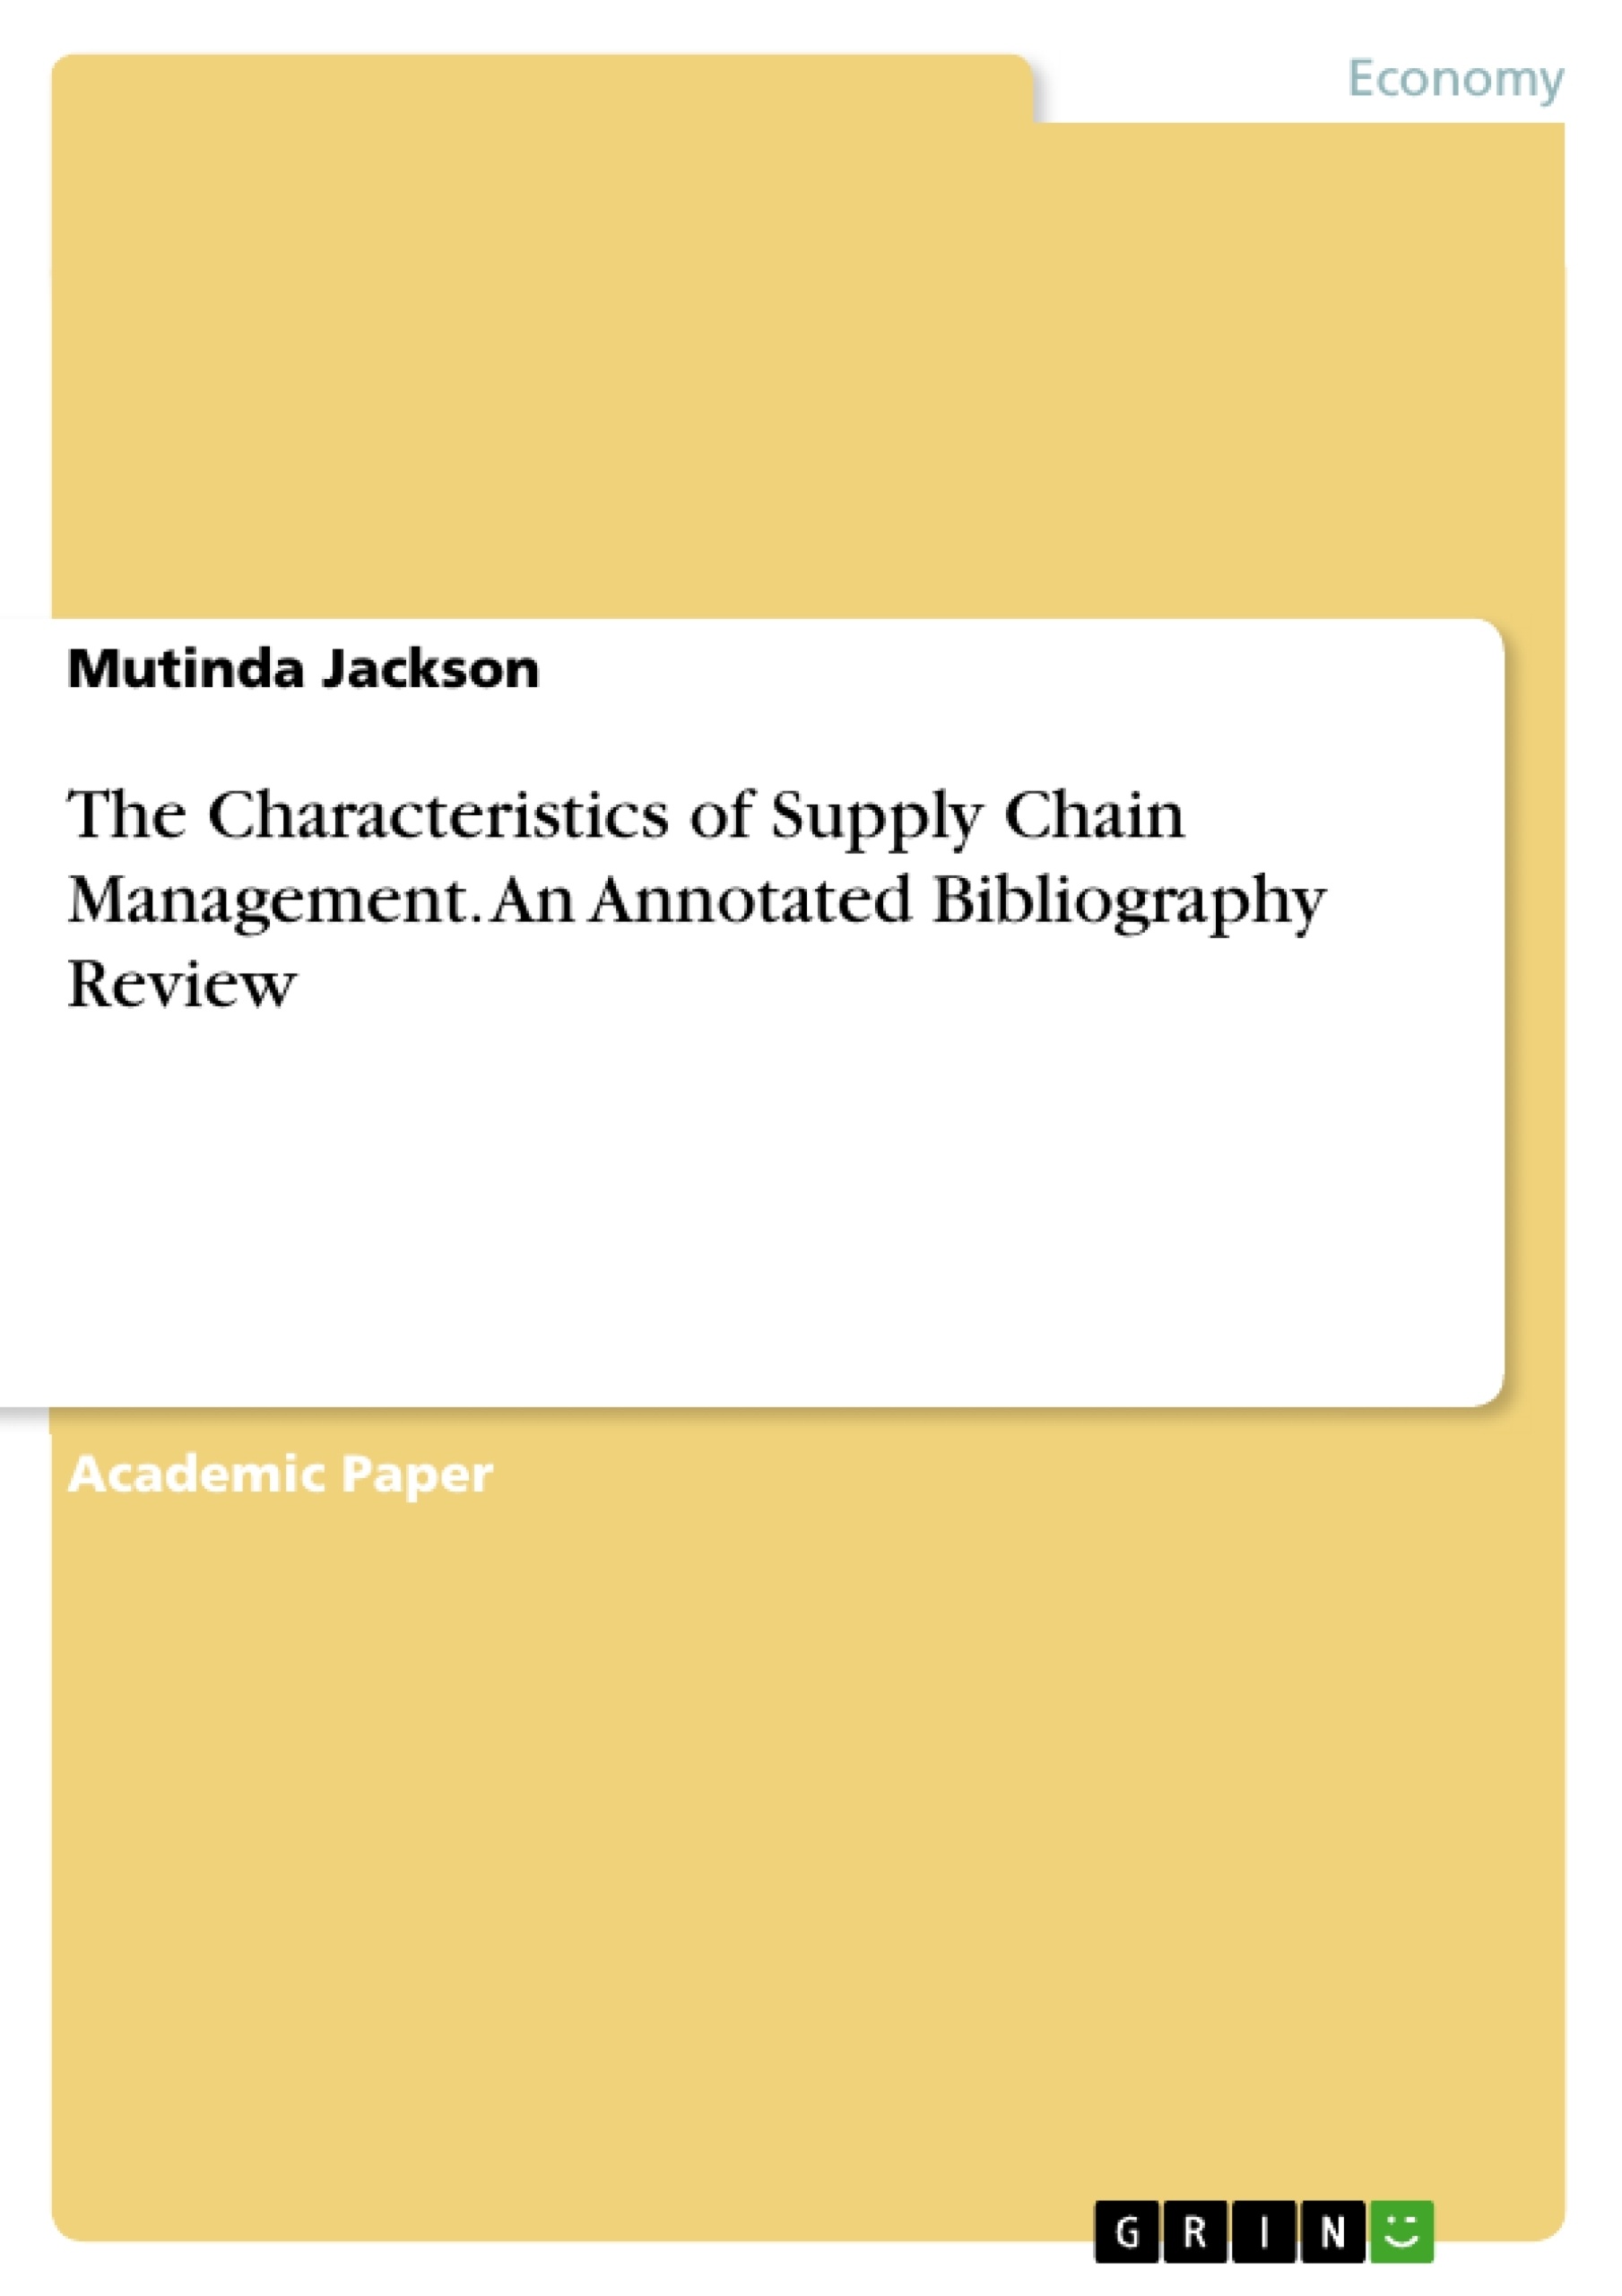 Titel: The Characteristics of Supply Chain Management. An Annotated Bibliography Review